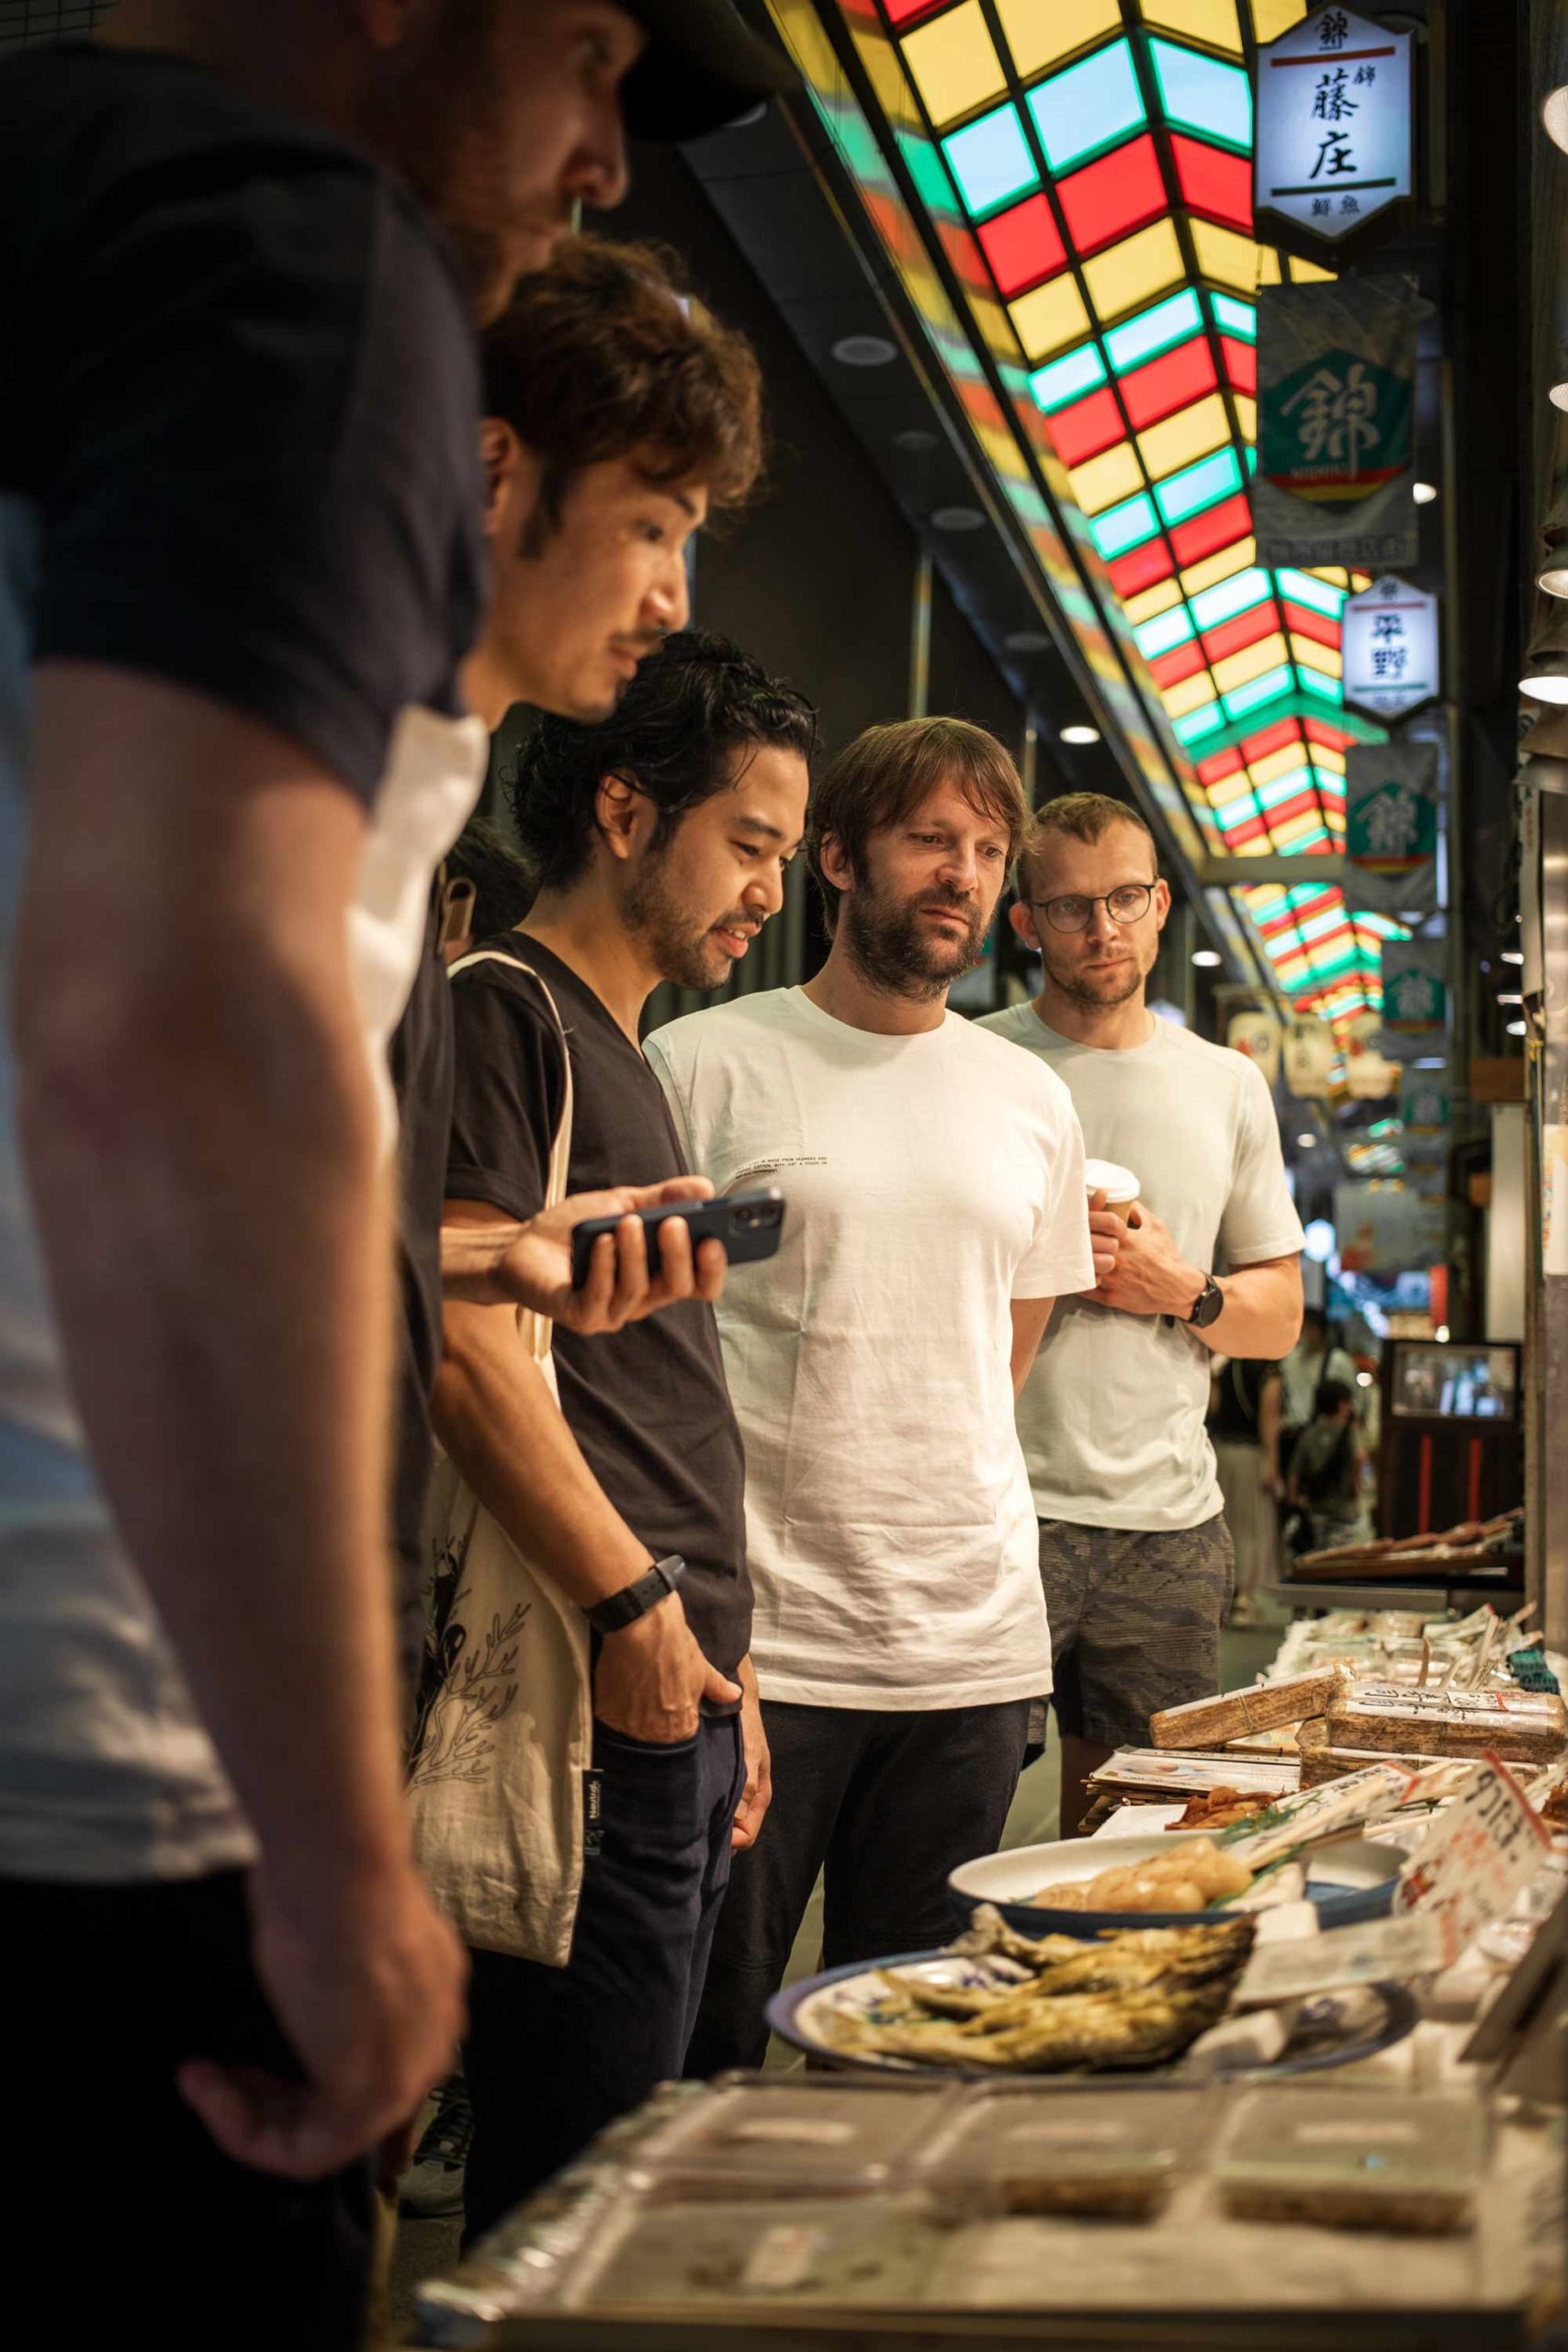 Chef Renè and the noma team researching hyper-local ingredients in Kyoto market. Photo by Amy Tang